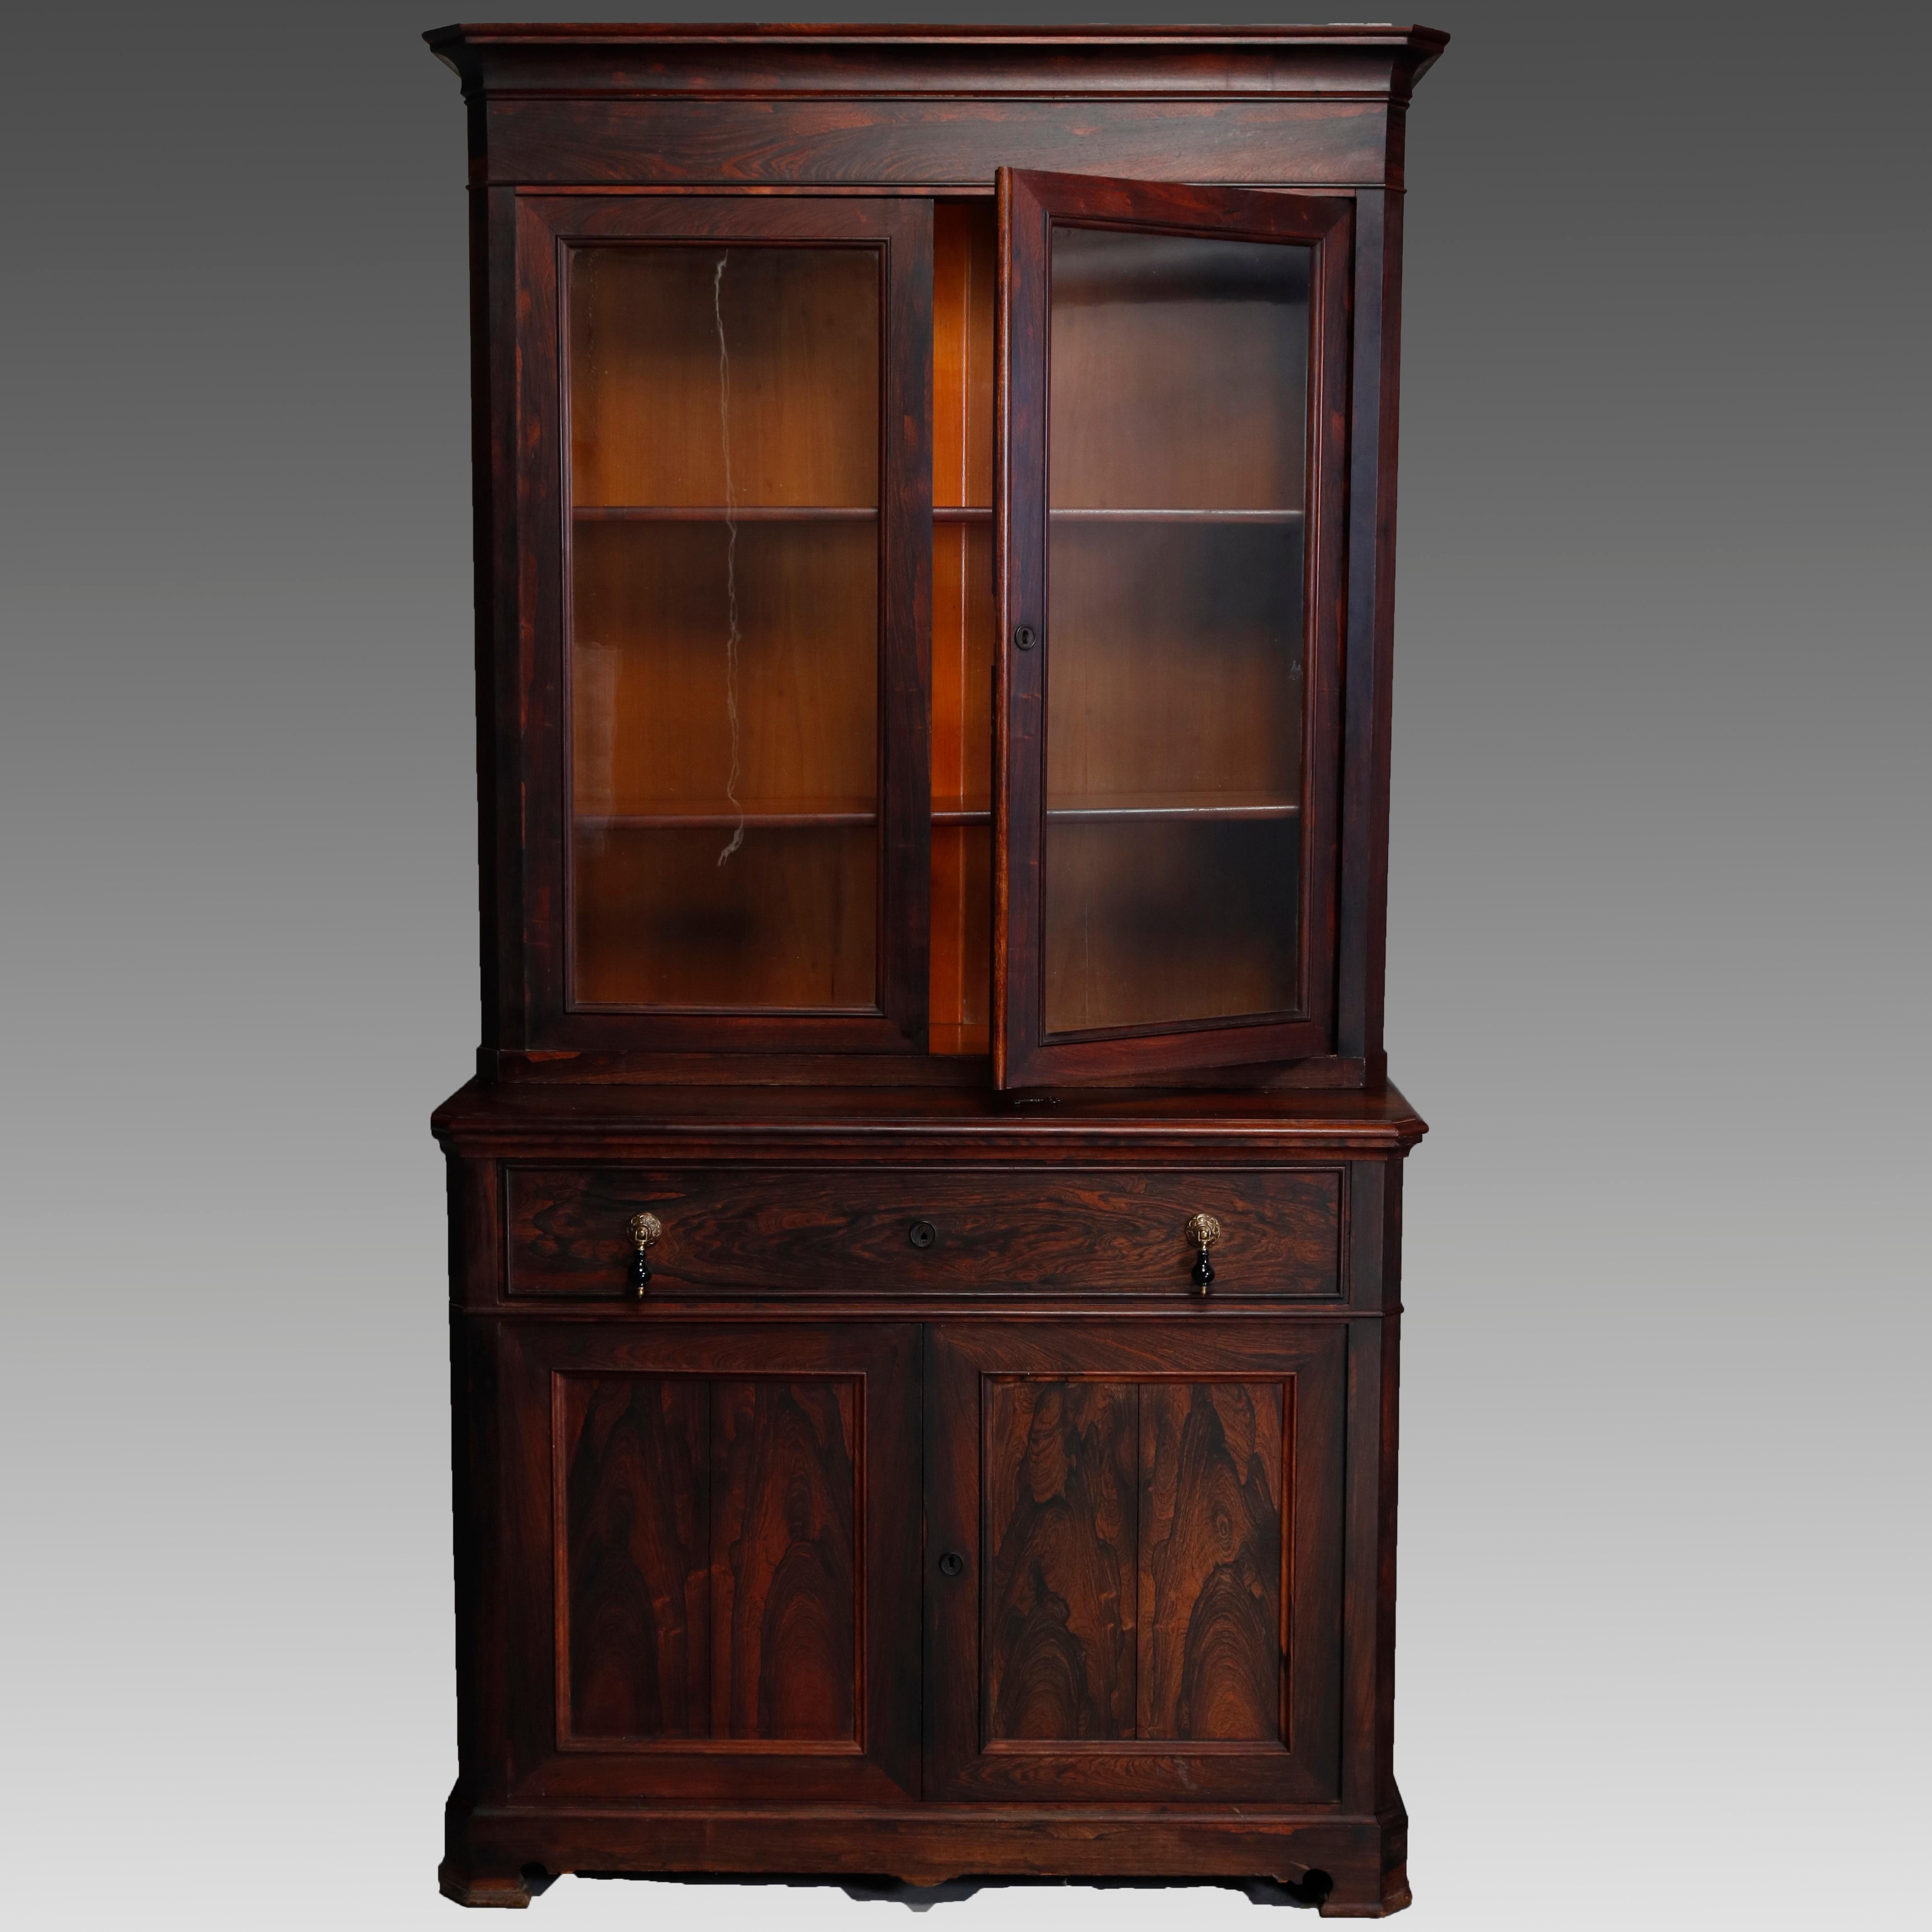 An antique Victorian secretary offers deeply striated rosewood construction with upper bookcase having double glass doors and surmounting lower case with drop front desk with teardrop pulls opening to reveal writing surface with storage compartment